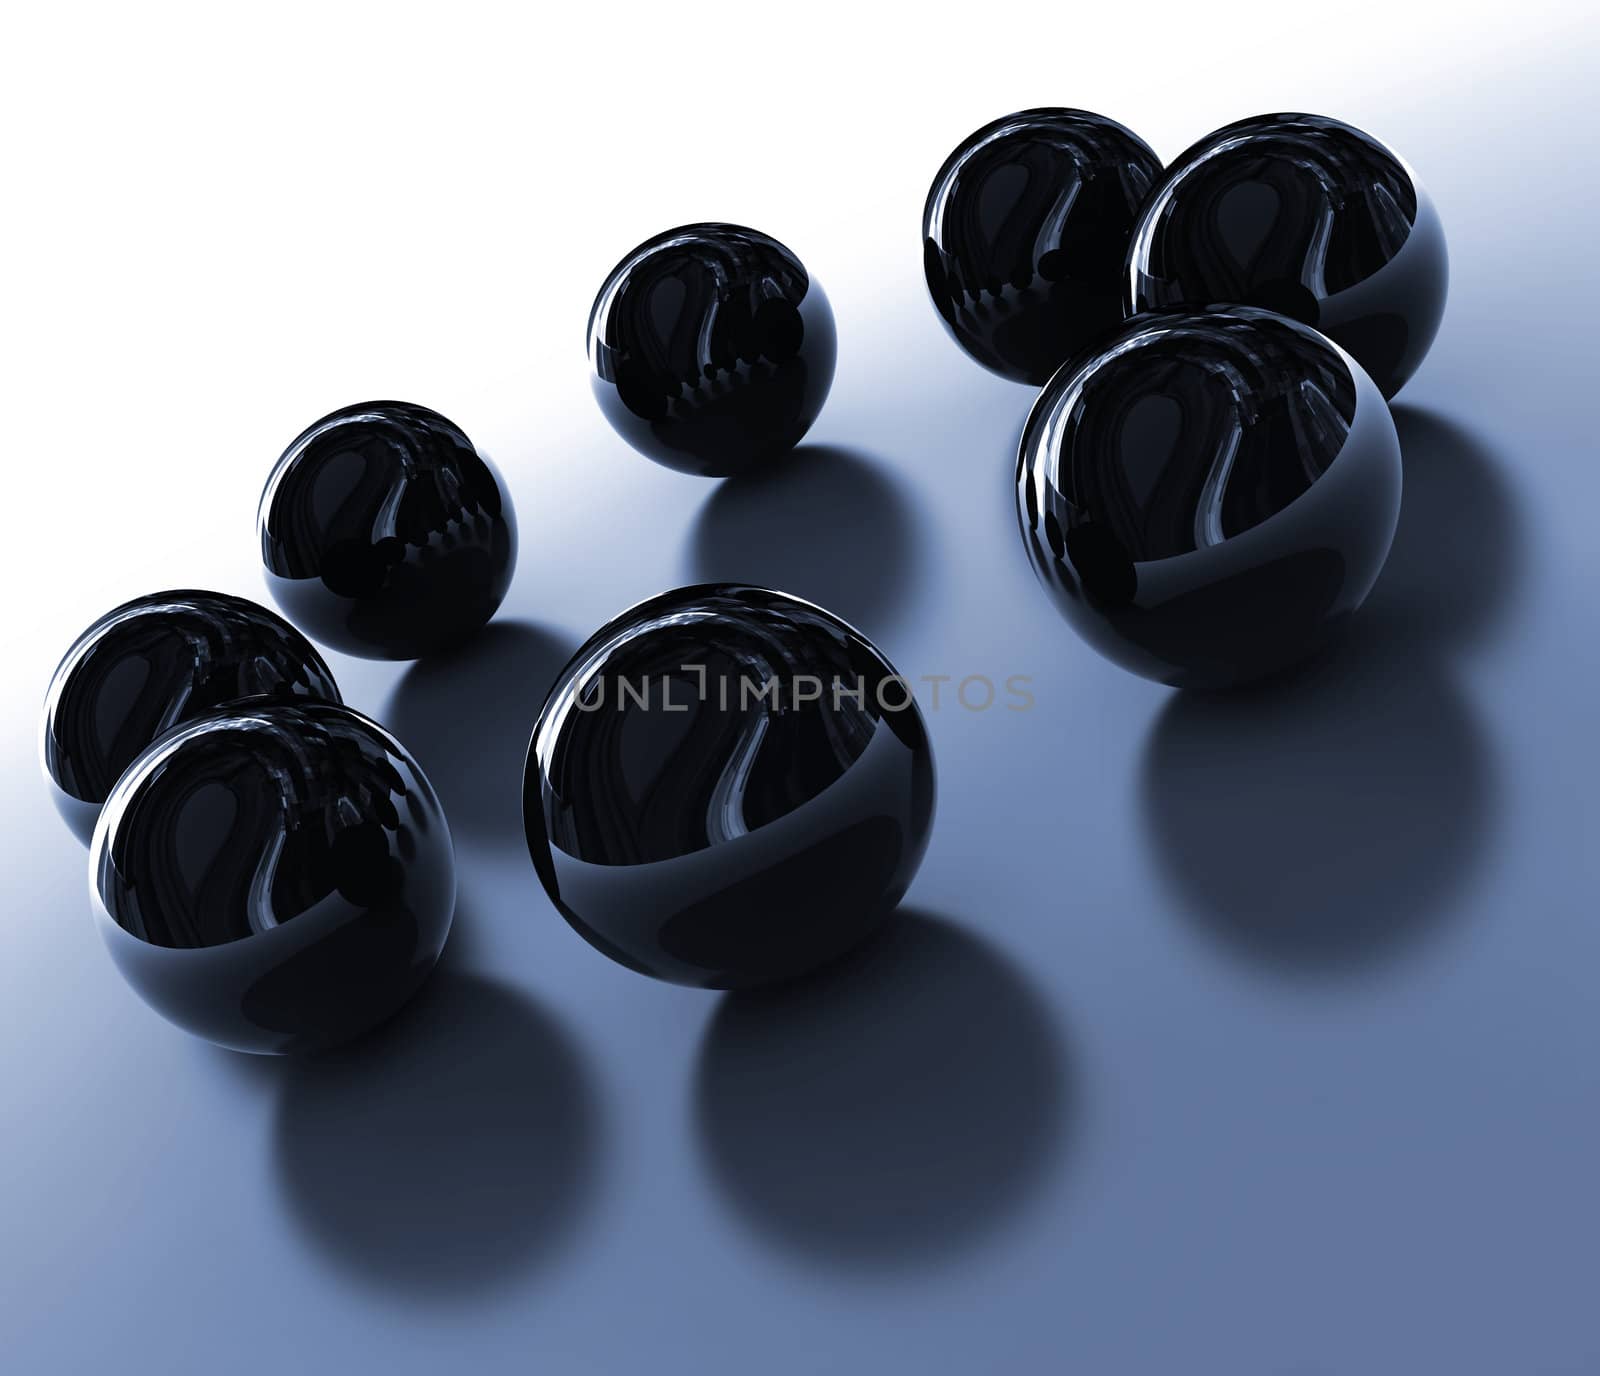 Abstract dark metallic spheres on a blue reflective background